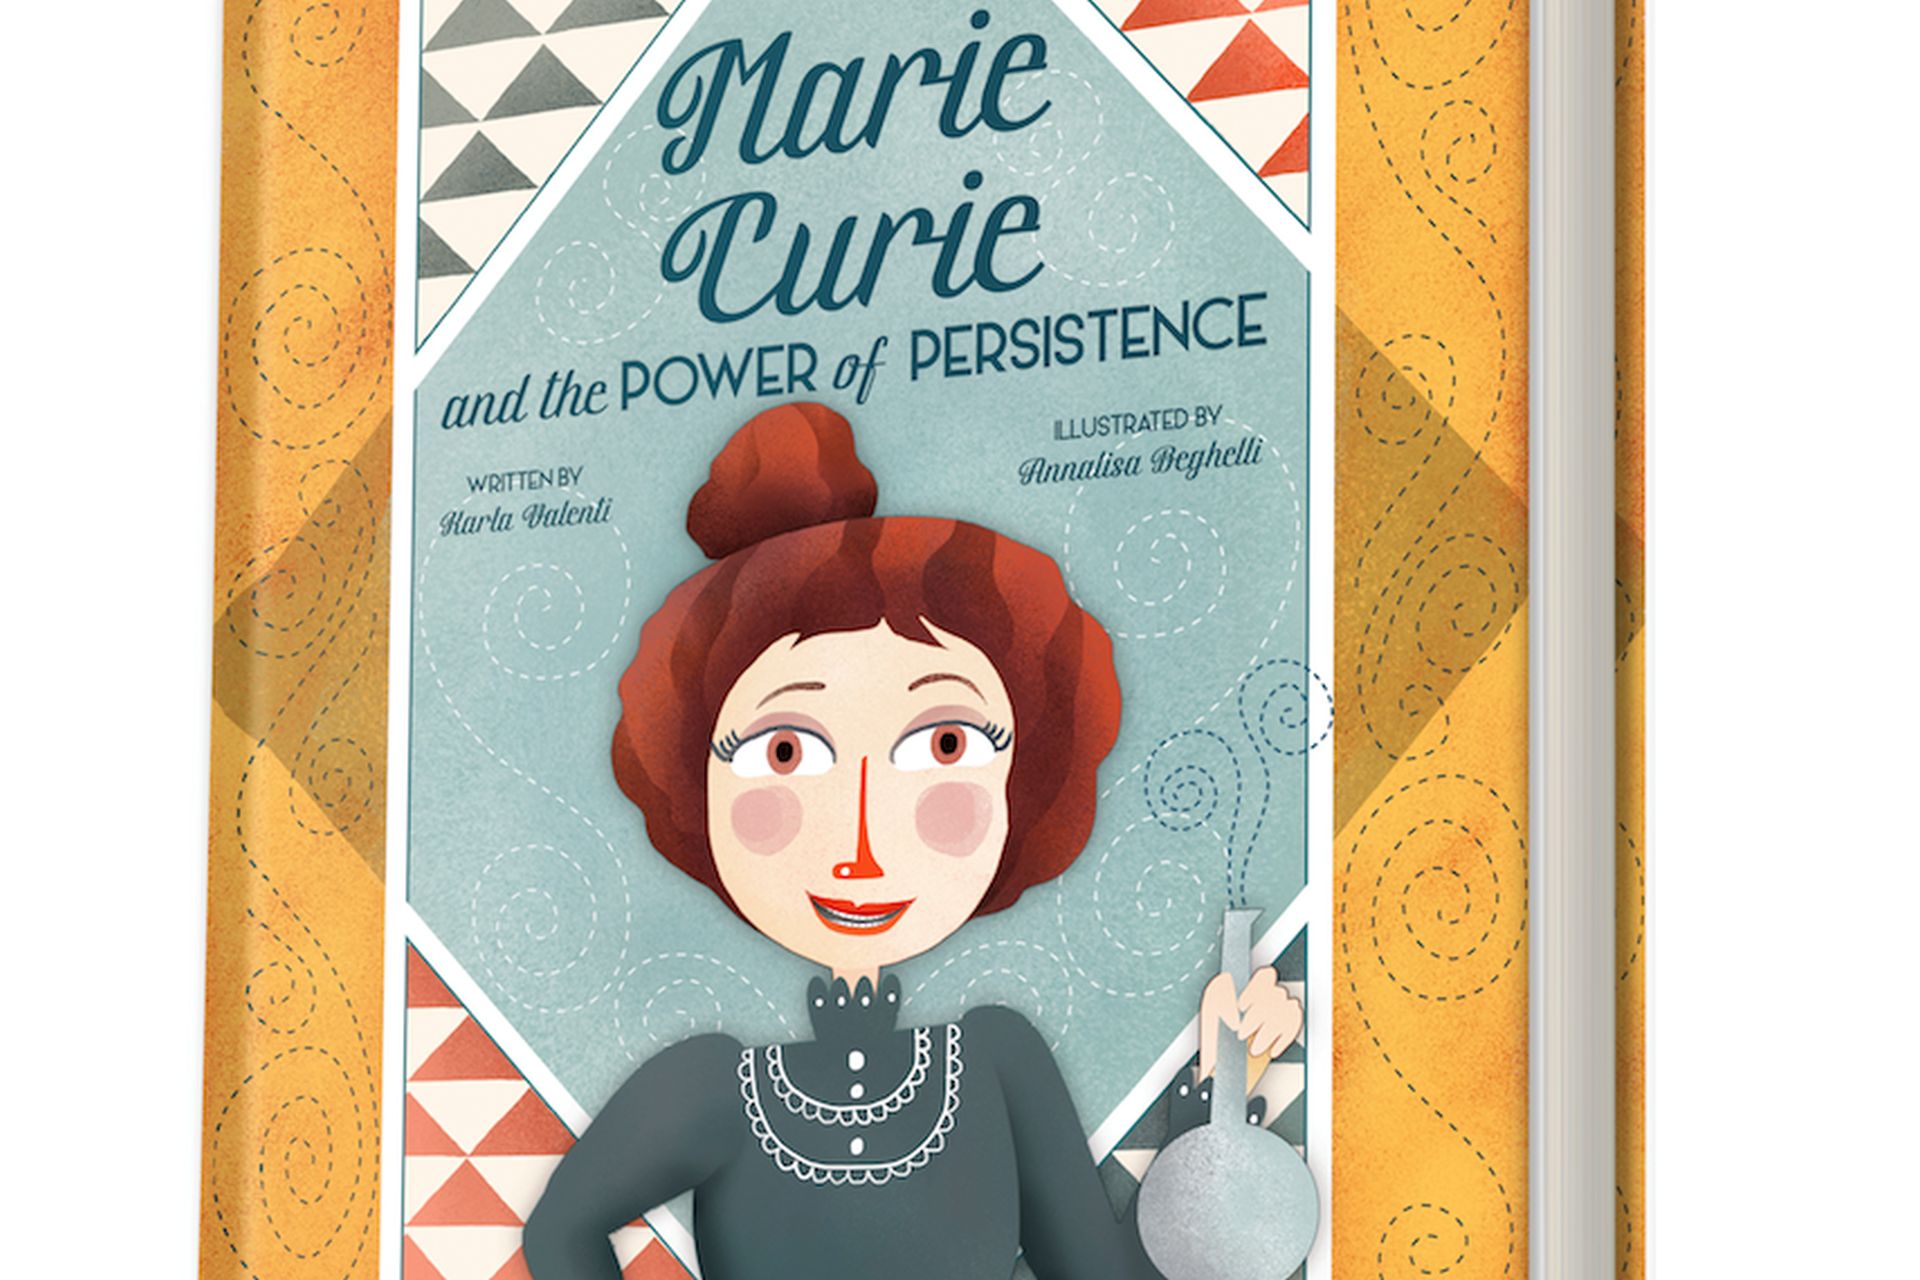 Marie Curie superhero book for kids now available on IndieGoGo